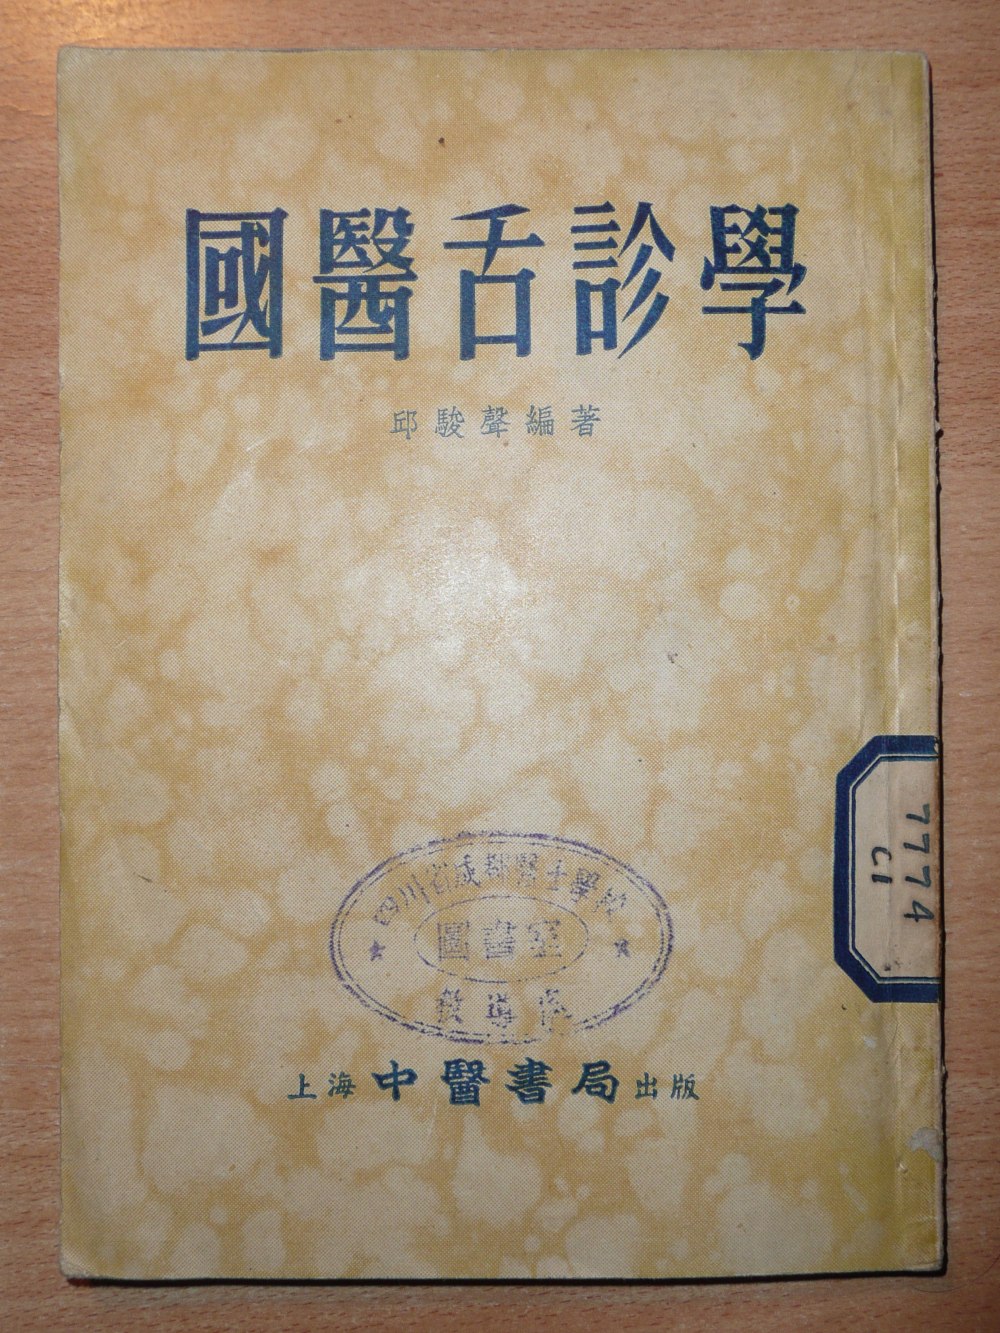 Author's copy of the "Tongue Diagnosis in the National Medicine"